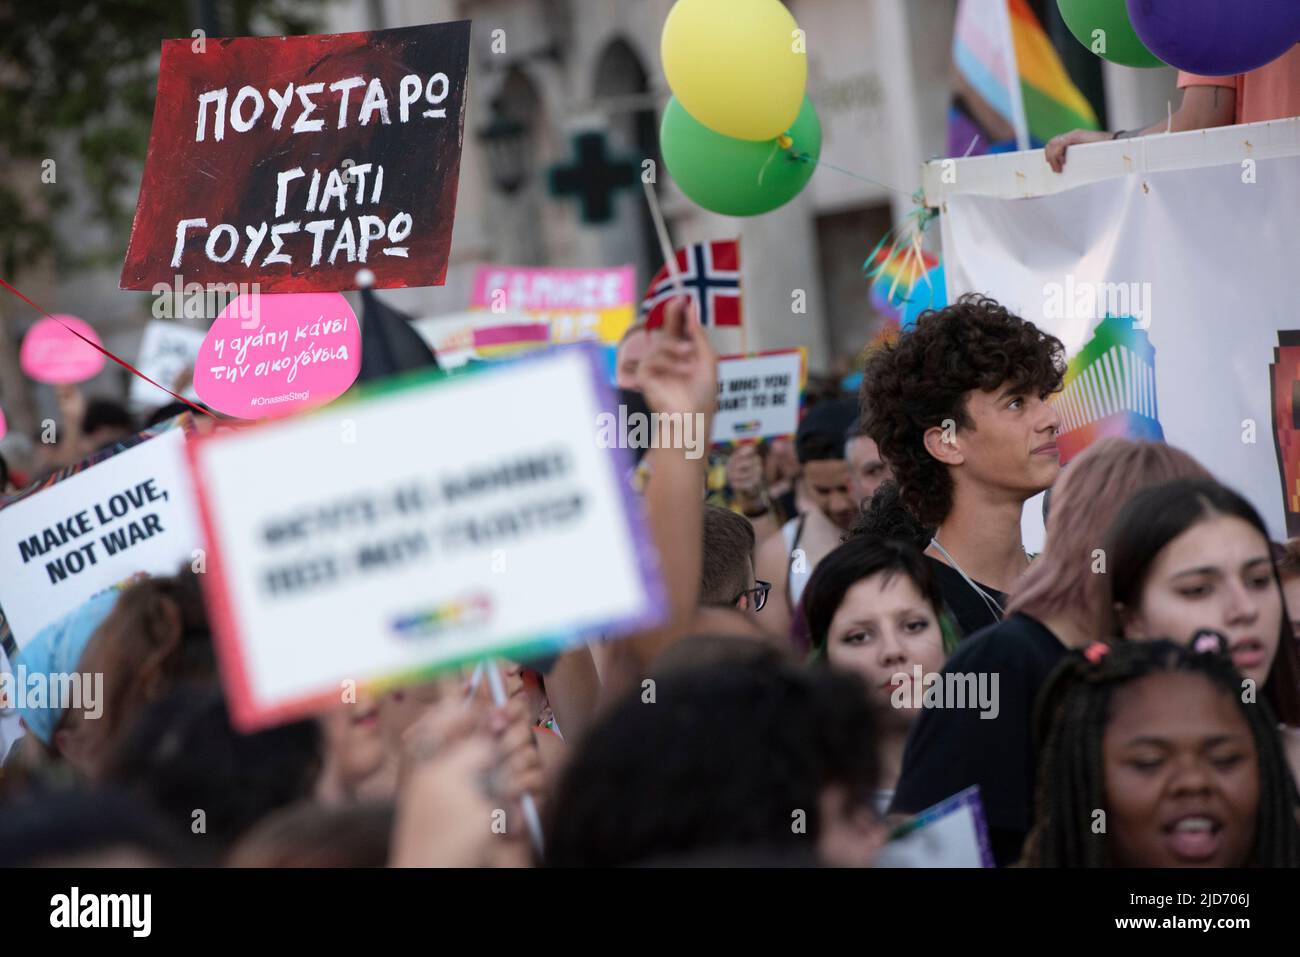 Athens, Greece. 18th June, 2022. People march waving rainbow flags and holding placards, during the Athens Pride anual parade. Thousands demonstrated during the Athens Pride 2022 parade to raise awareness, elevate the visibility of LGBTQ persons in Greek society and defend their rights against sexual discrimination. Credit: Nikolas Georgiou/Alamy Live News Stock Photo